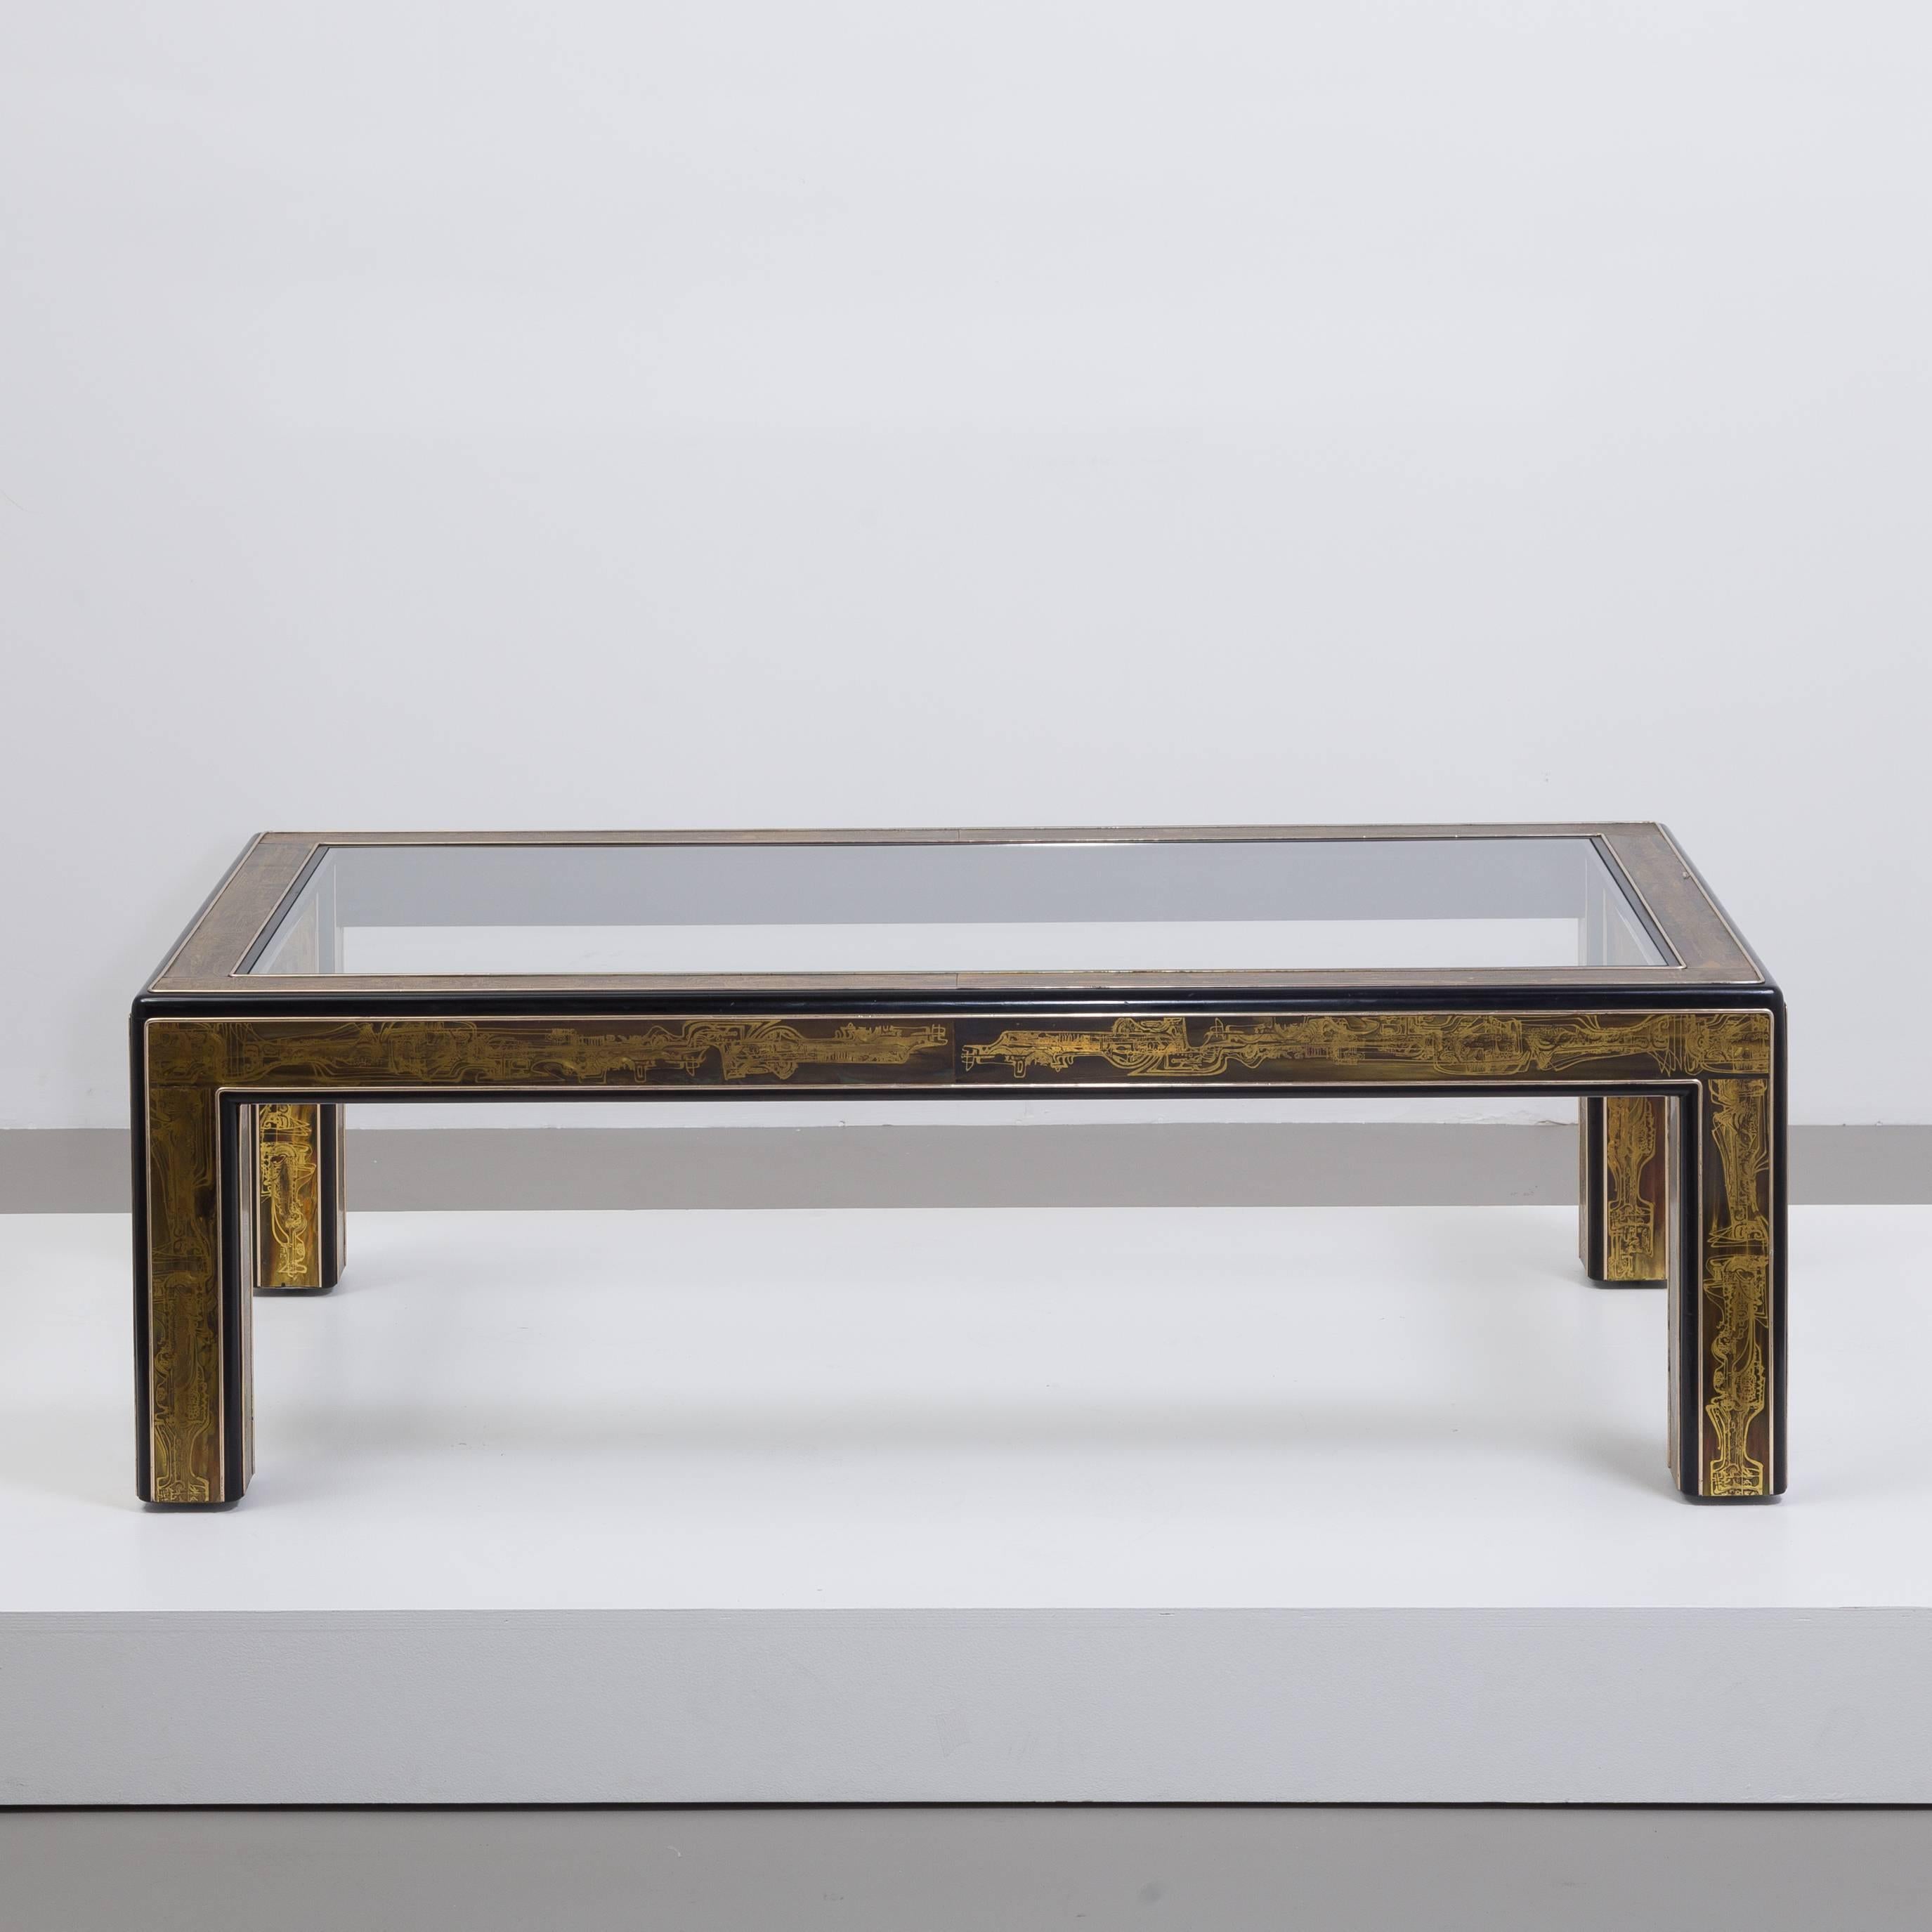 A rectangular Bernhard Rohne designed for Mastercraft acid etched brass and ebonized coffee table with inset glass top, USA, 1970s.

Price includes 20% VAT which is removed for items shipped outside the EU.